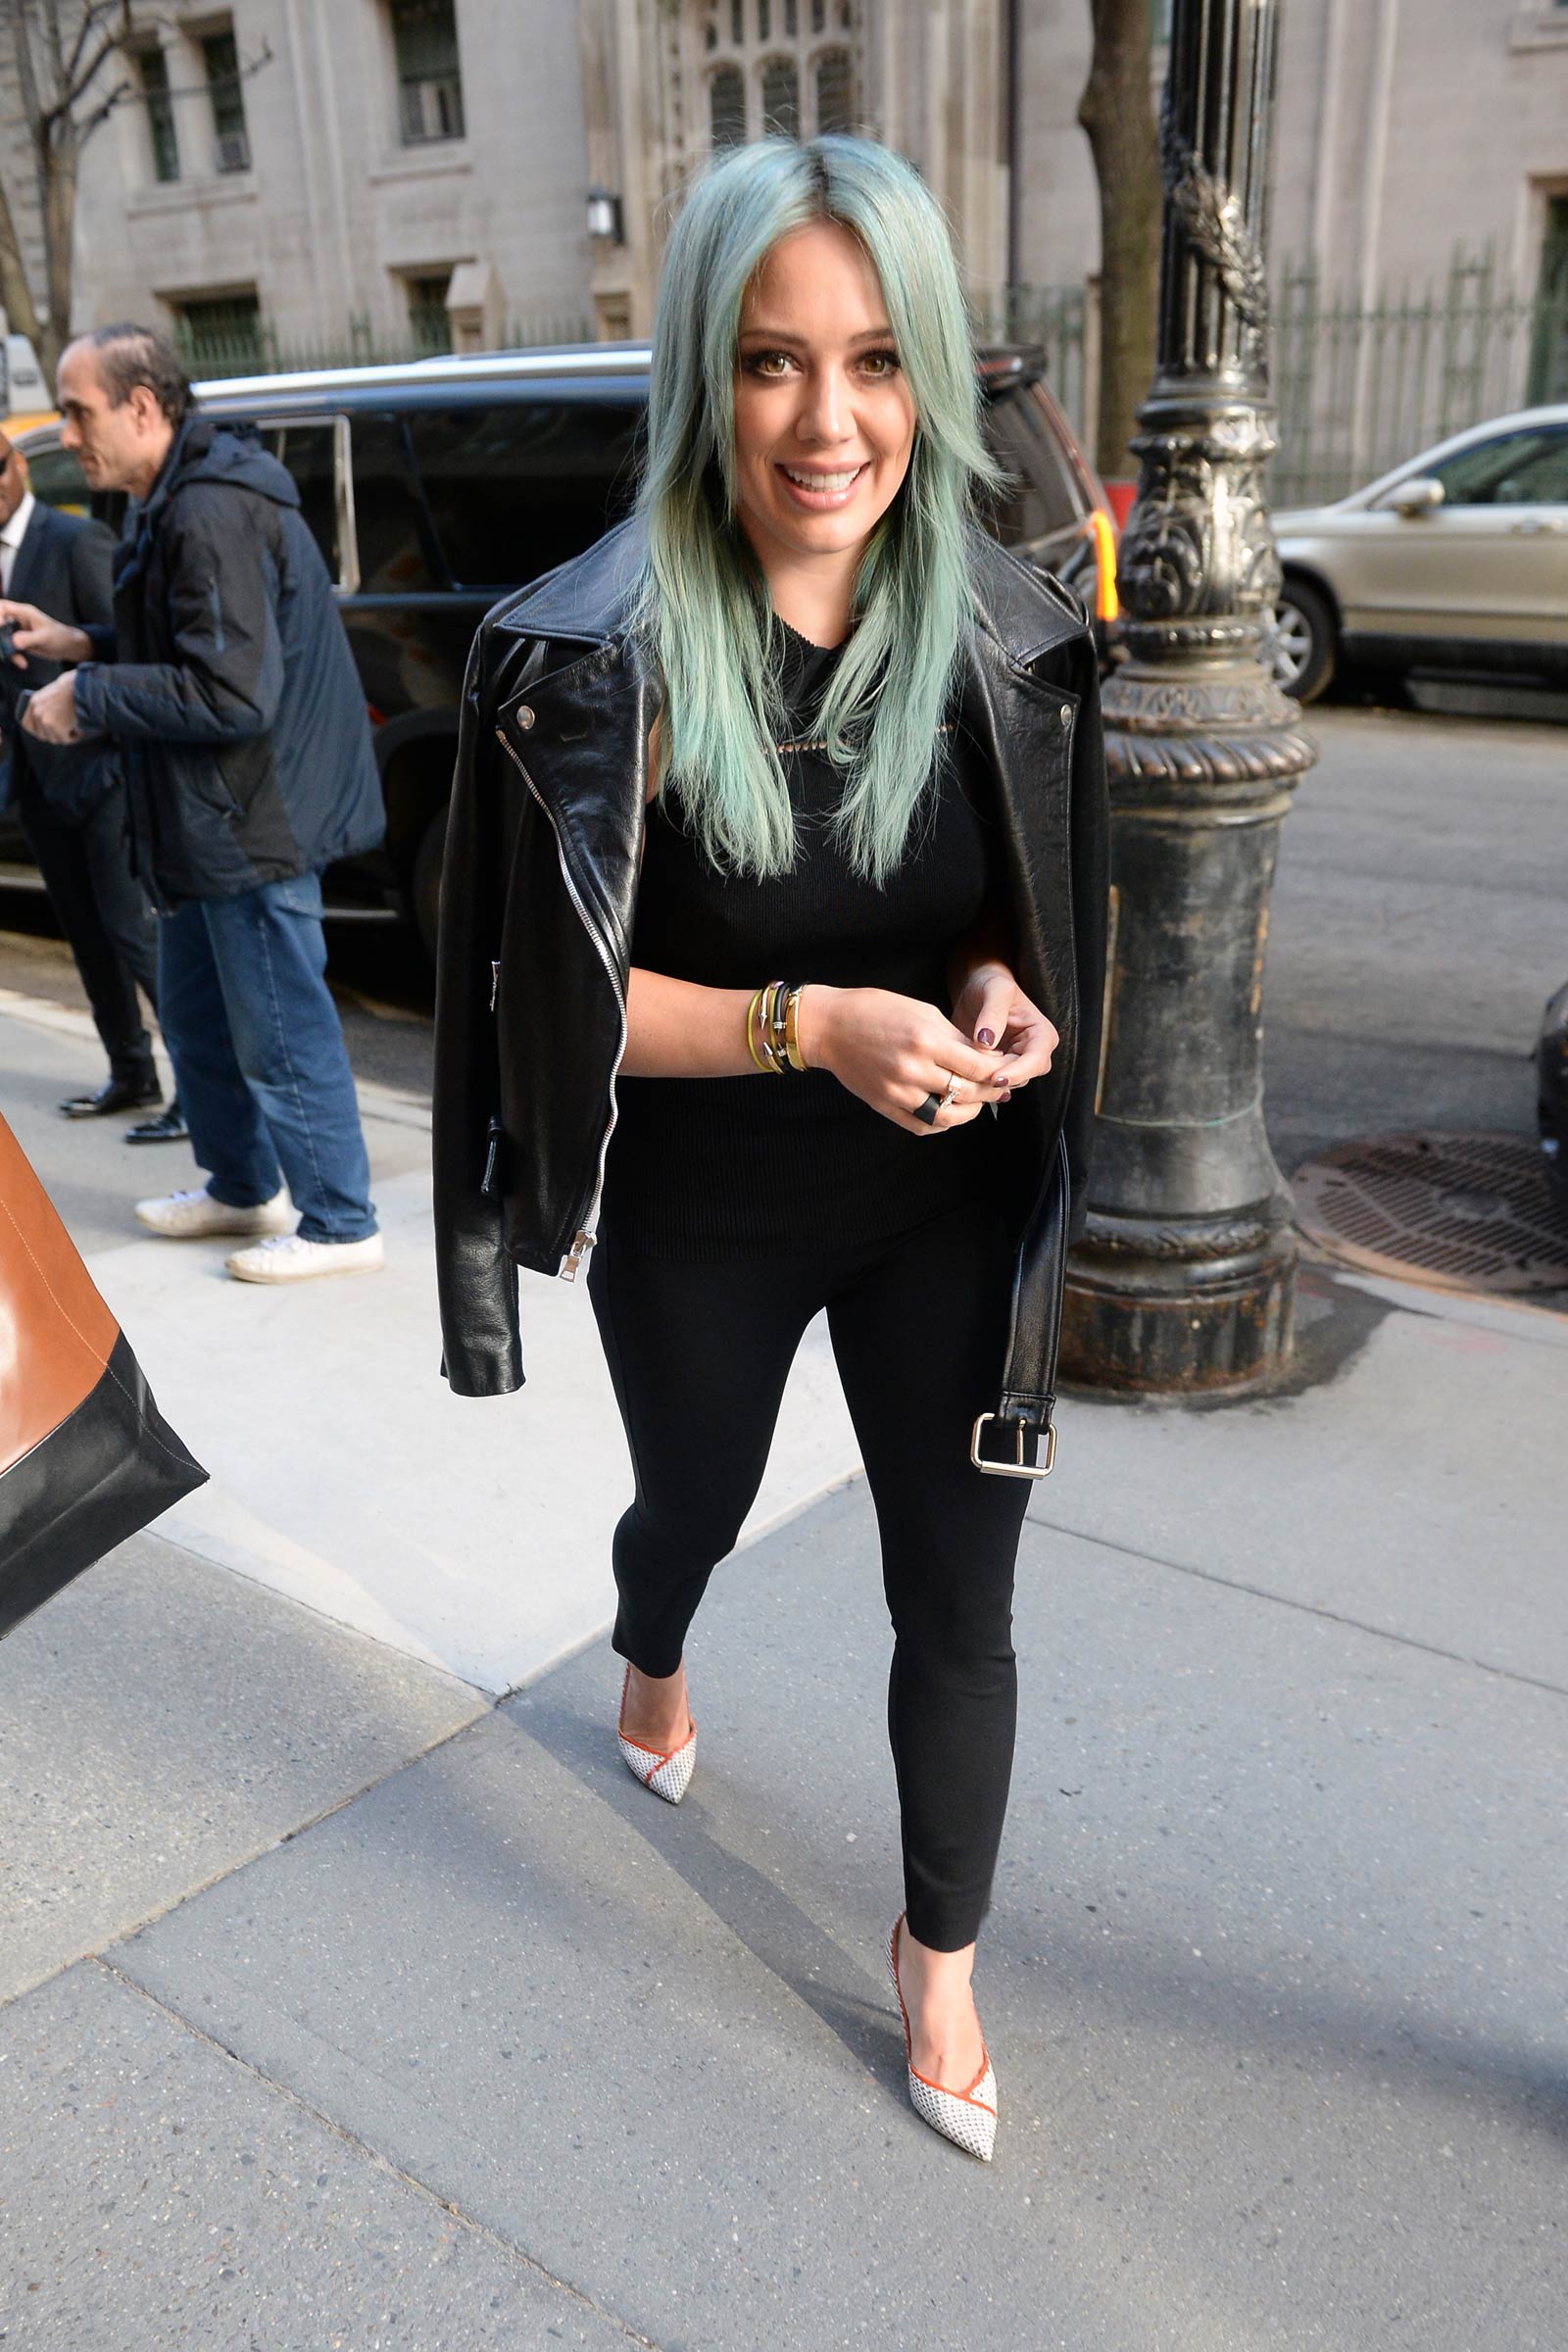 Hilary Duff arriving at The Chew in NYC